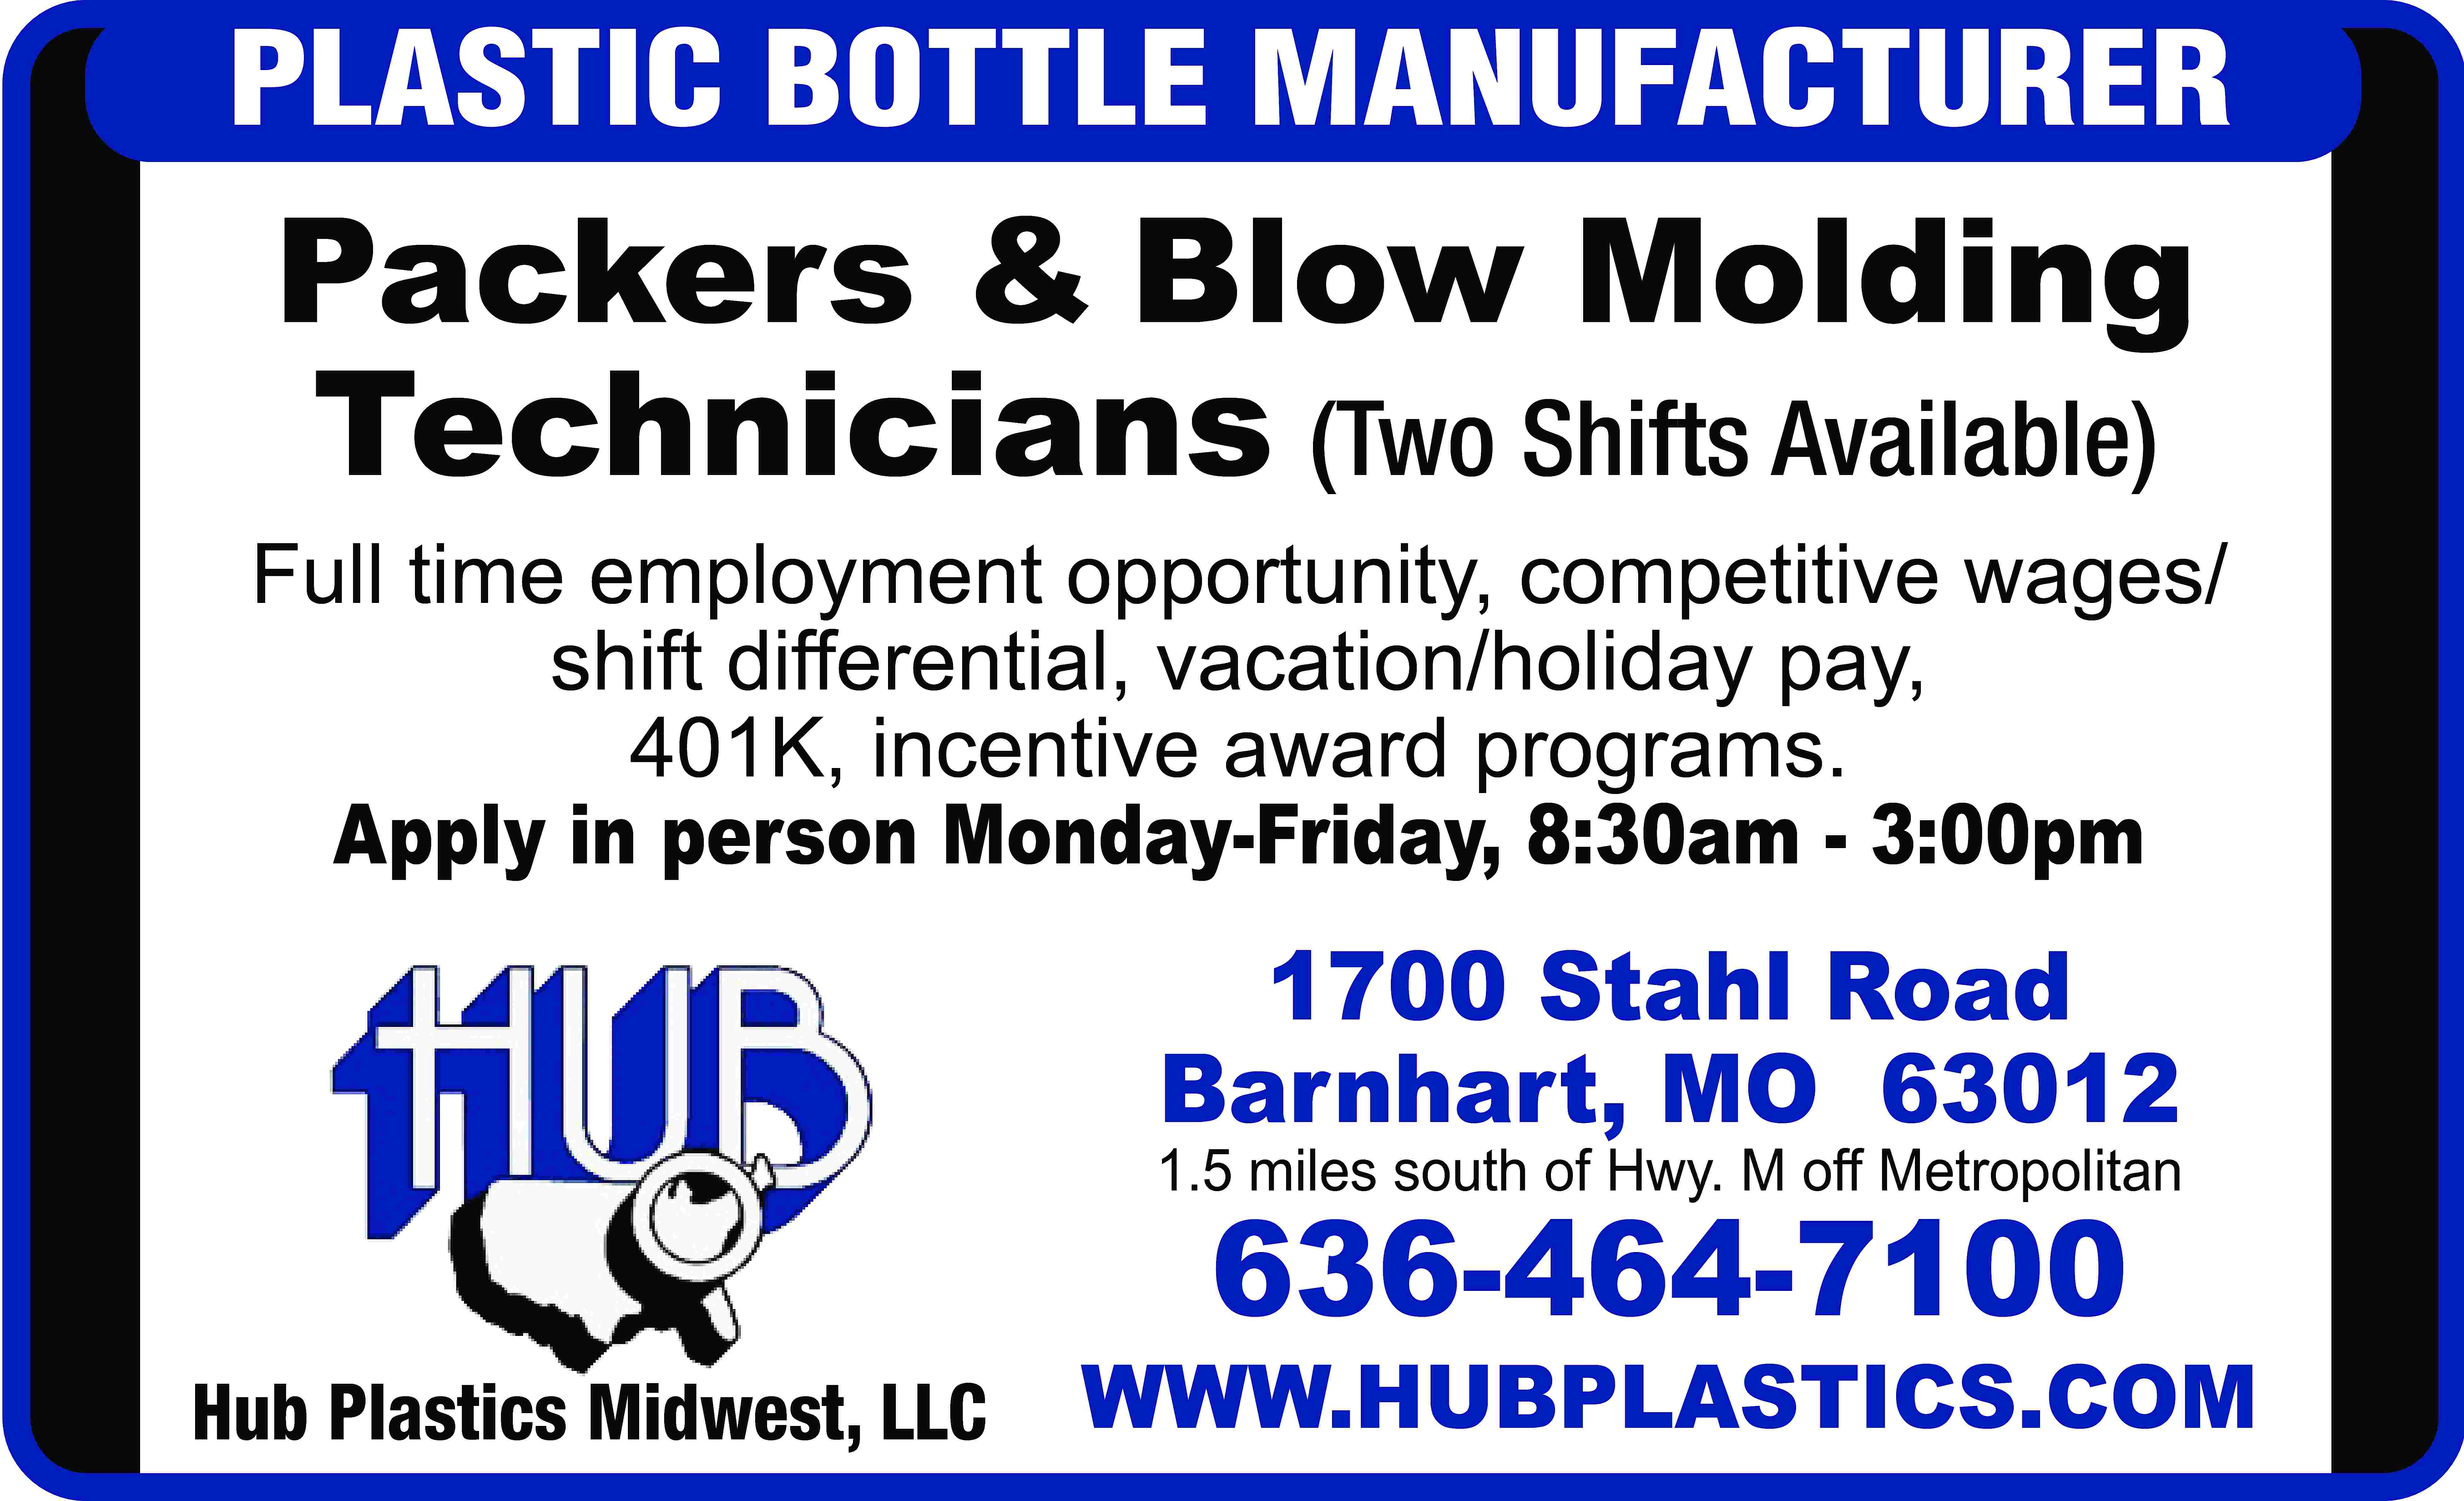 PLASTIC BOTTLE MANUFACTURER Packers &  PLASTIC BOTTLE MANUFACTURER Packers & Blow Molding Technicians (Two Shifts Available) Full time employment opportunity, competitive wages/ shift differential, vacation/holiday pay, 401K, incentive award programs. Apply in person Monday-Friday, 8:30am - 3:00pm 1700 Stahl Road Barnhart, MO 63012 1.5 miles south of Hwy. M off Metropolitan 636-464-7100 Hub Plastics Midwest, LLC WWW.HUBPLASTICS.COM